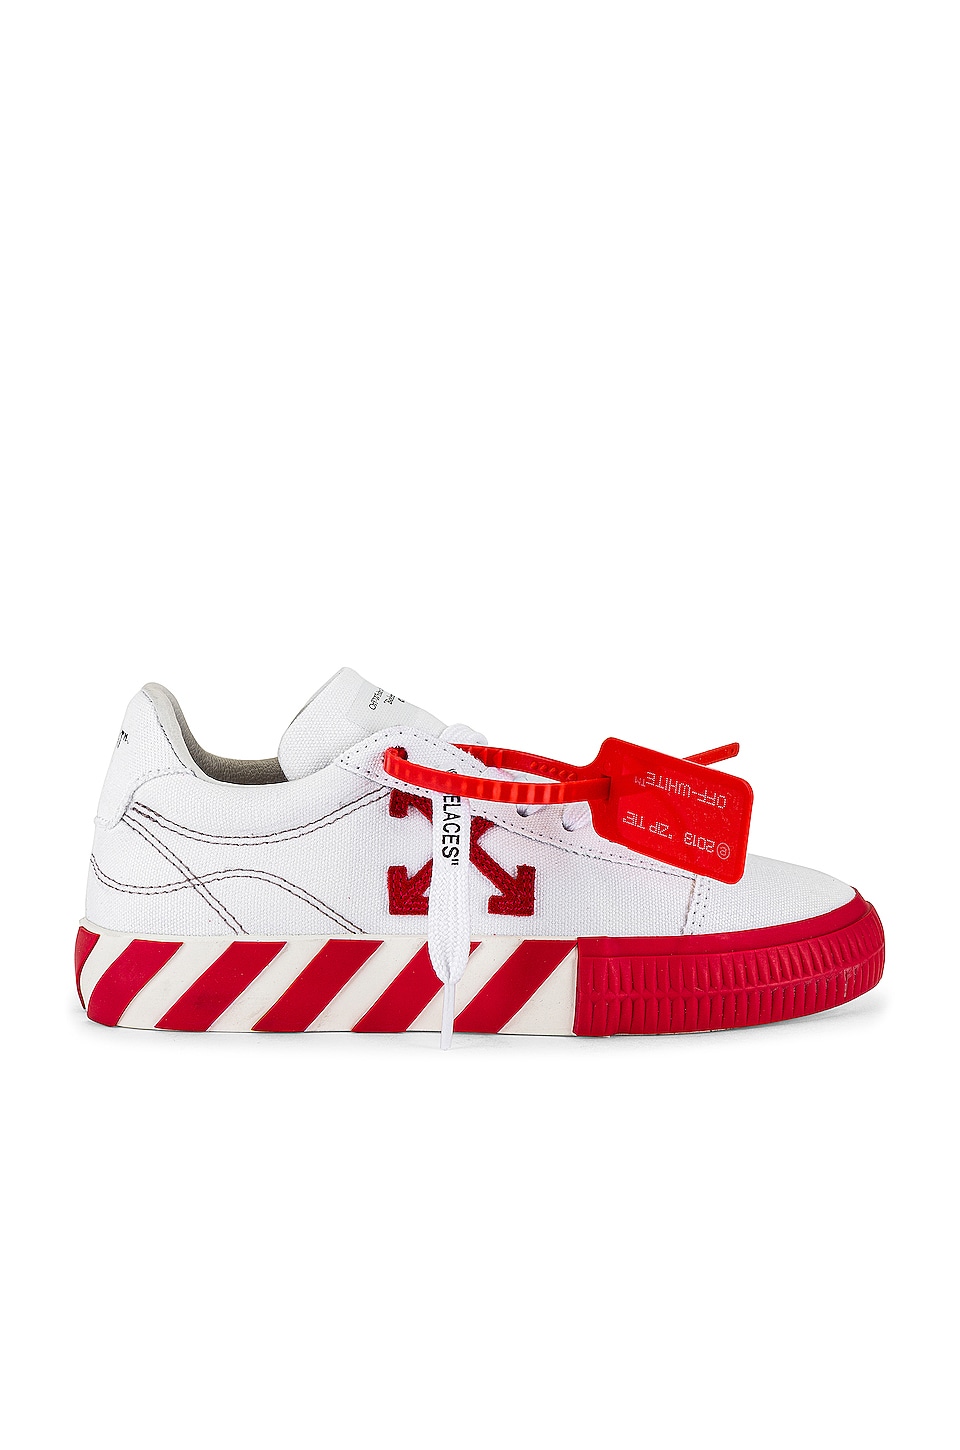 OFF-WHITE Canvas Low Vulcanized Sneaker in White & Red | REVOLVE